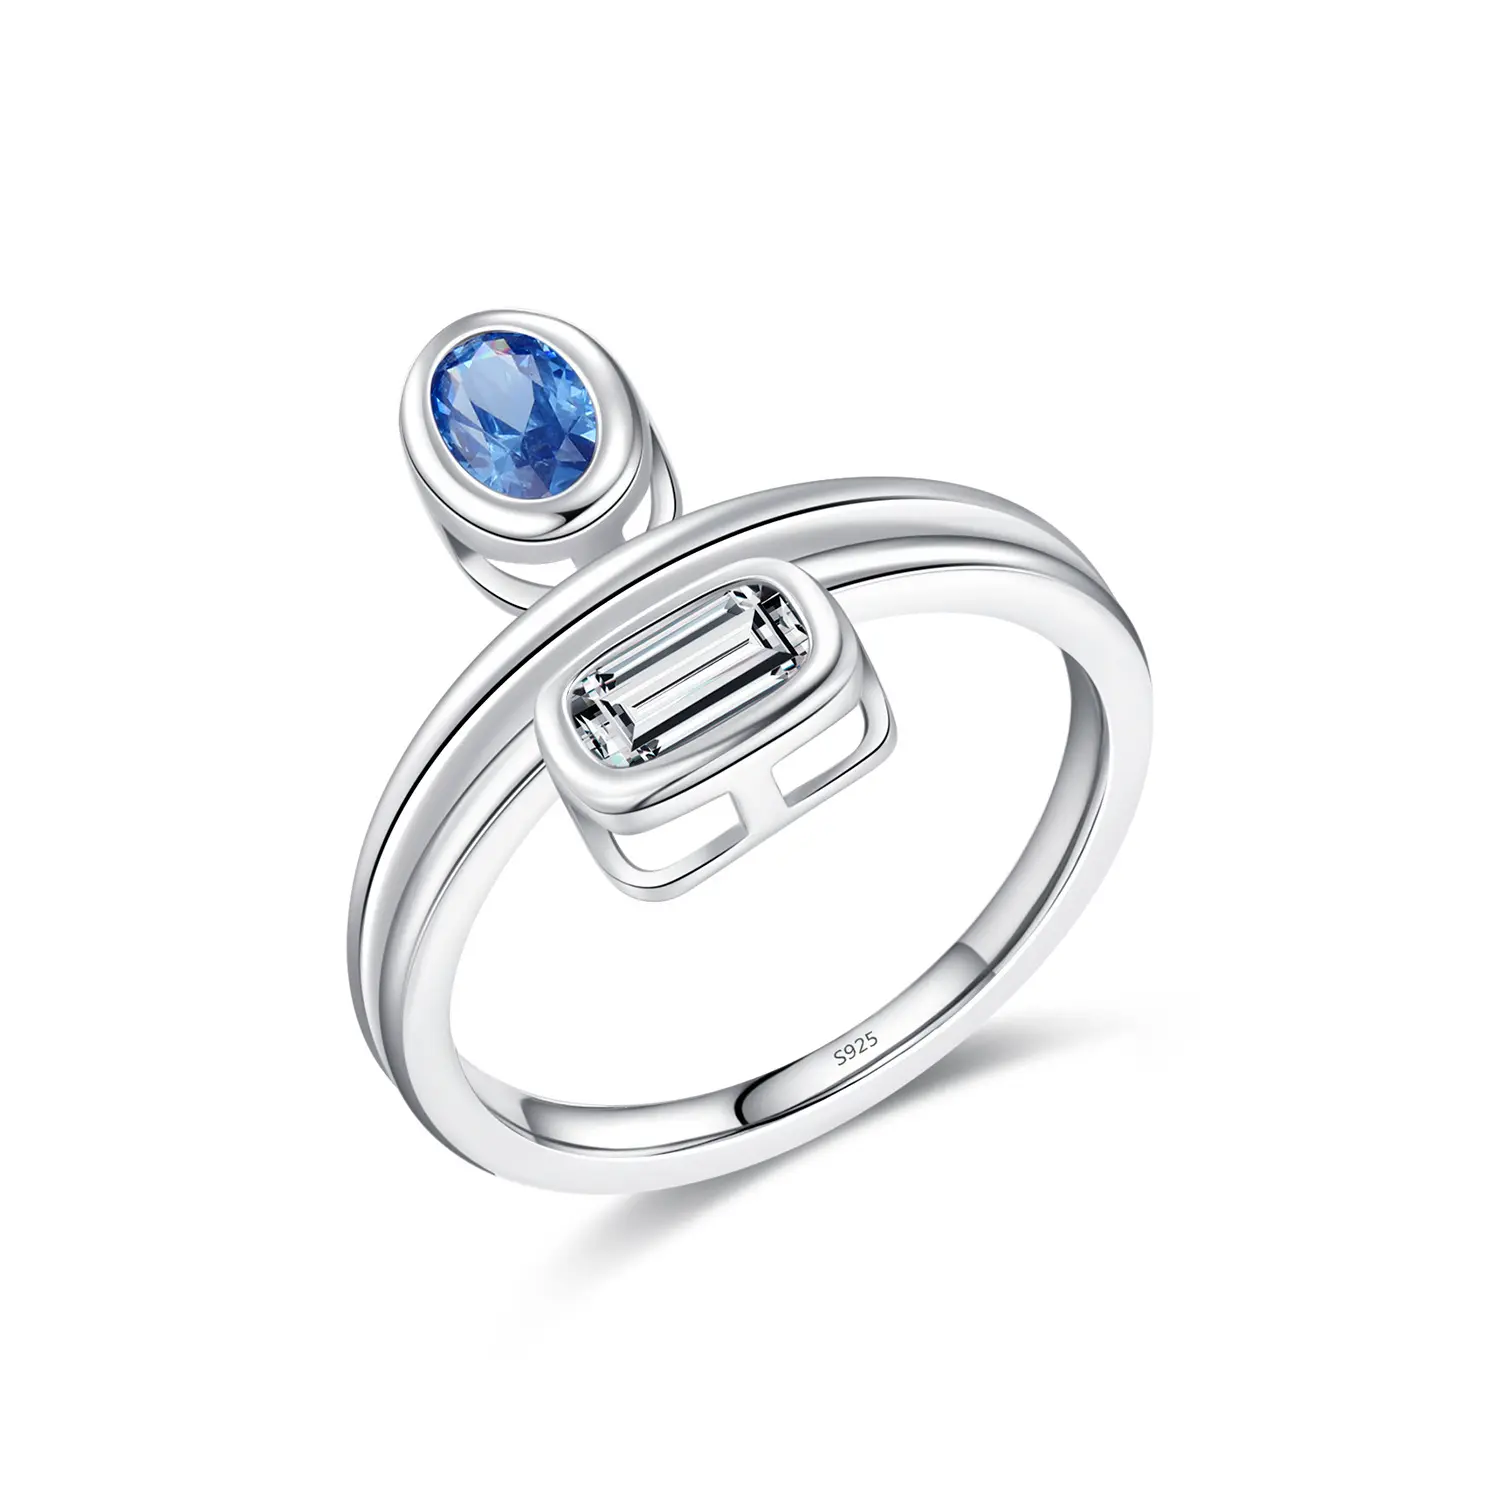 Stylish elegant unique double layer ring S925 sterling silver rhodium plated sea blue cubic zirconia cz ring